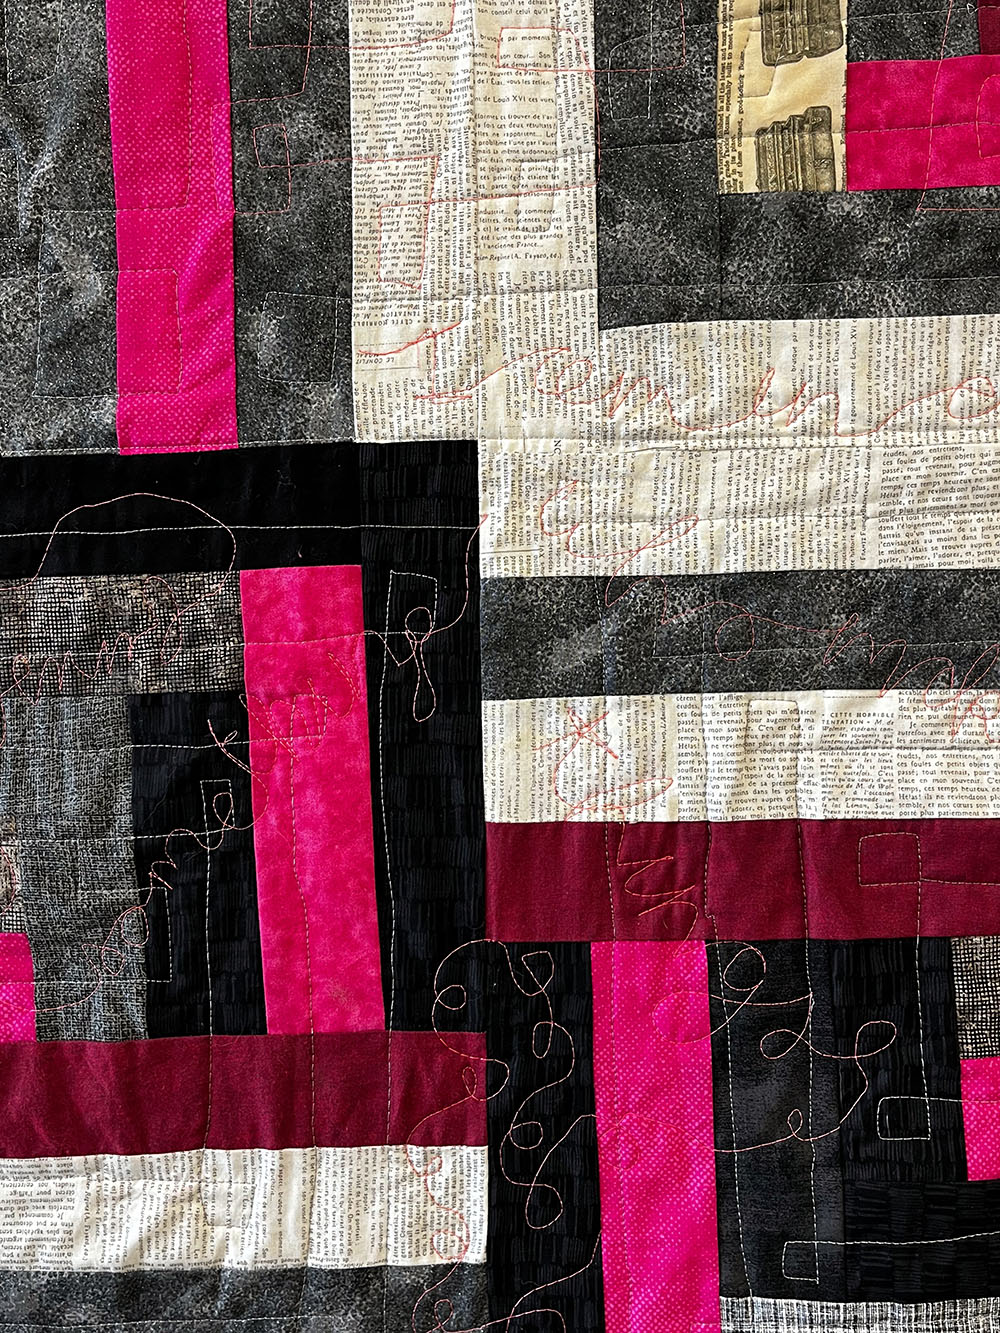 Quilt with blocks of fuschia, grey, black and gold-embroidered text.